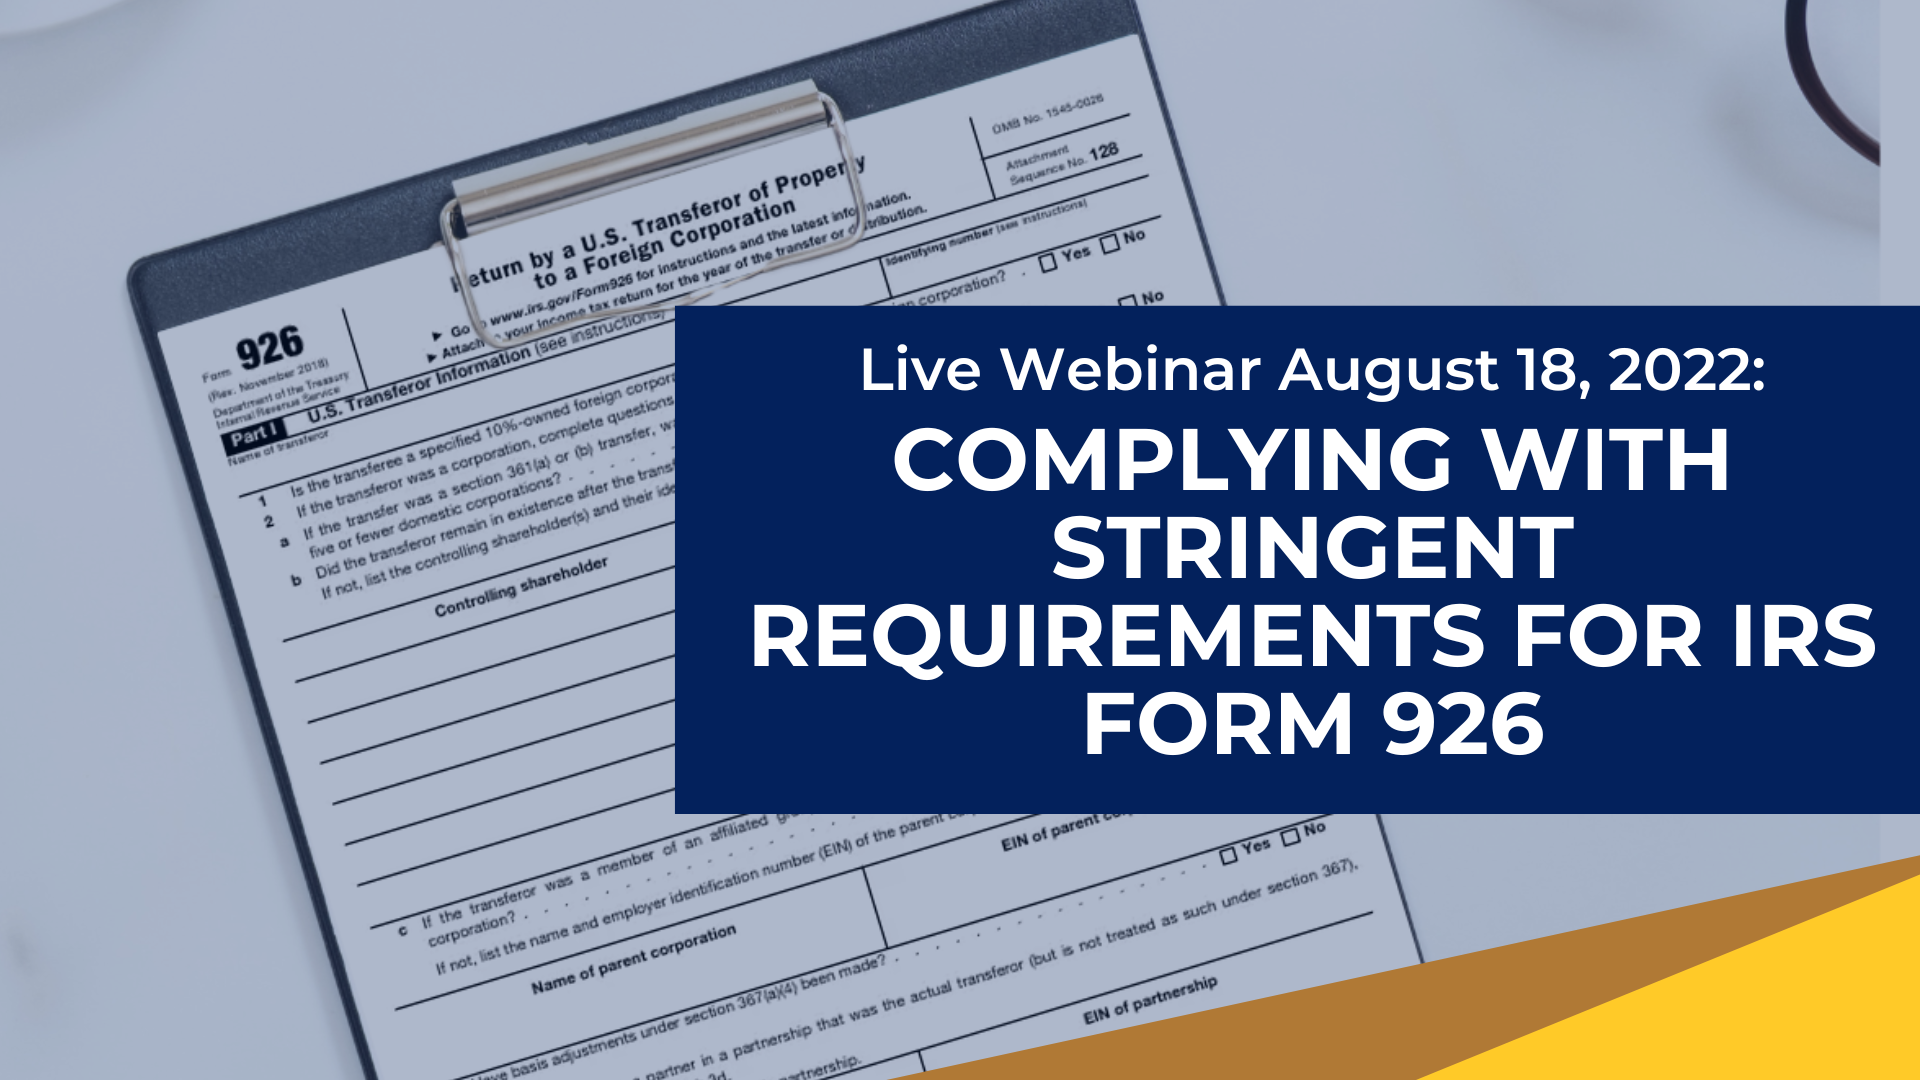 Announcing webinar by Jack Brister, IWTA on IRS Form 926